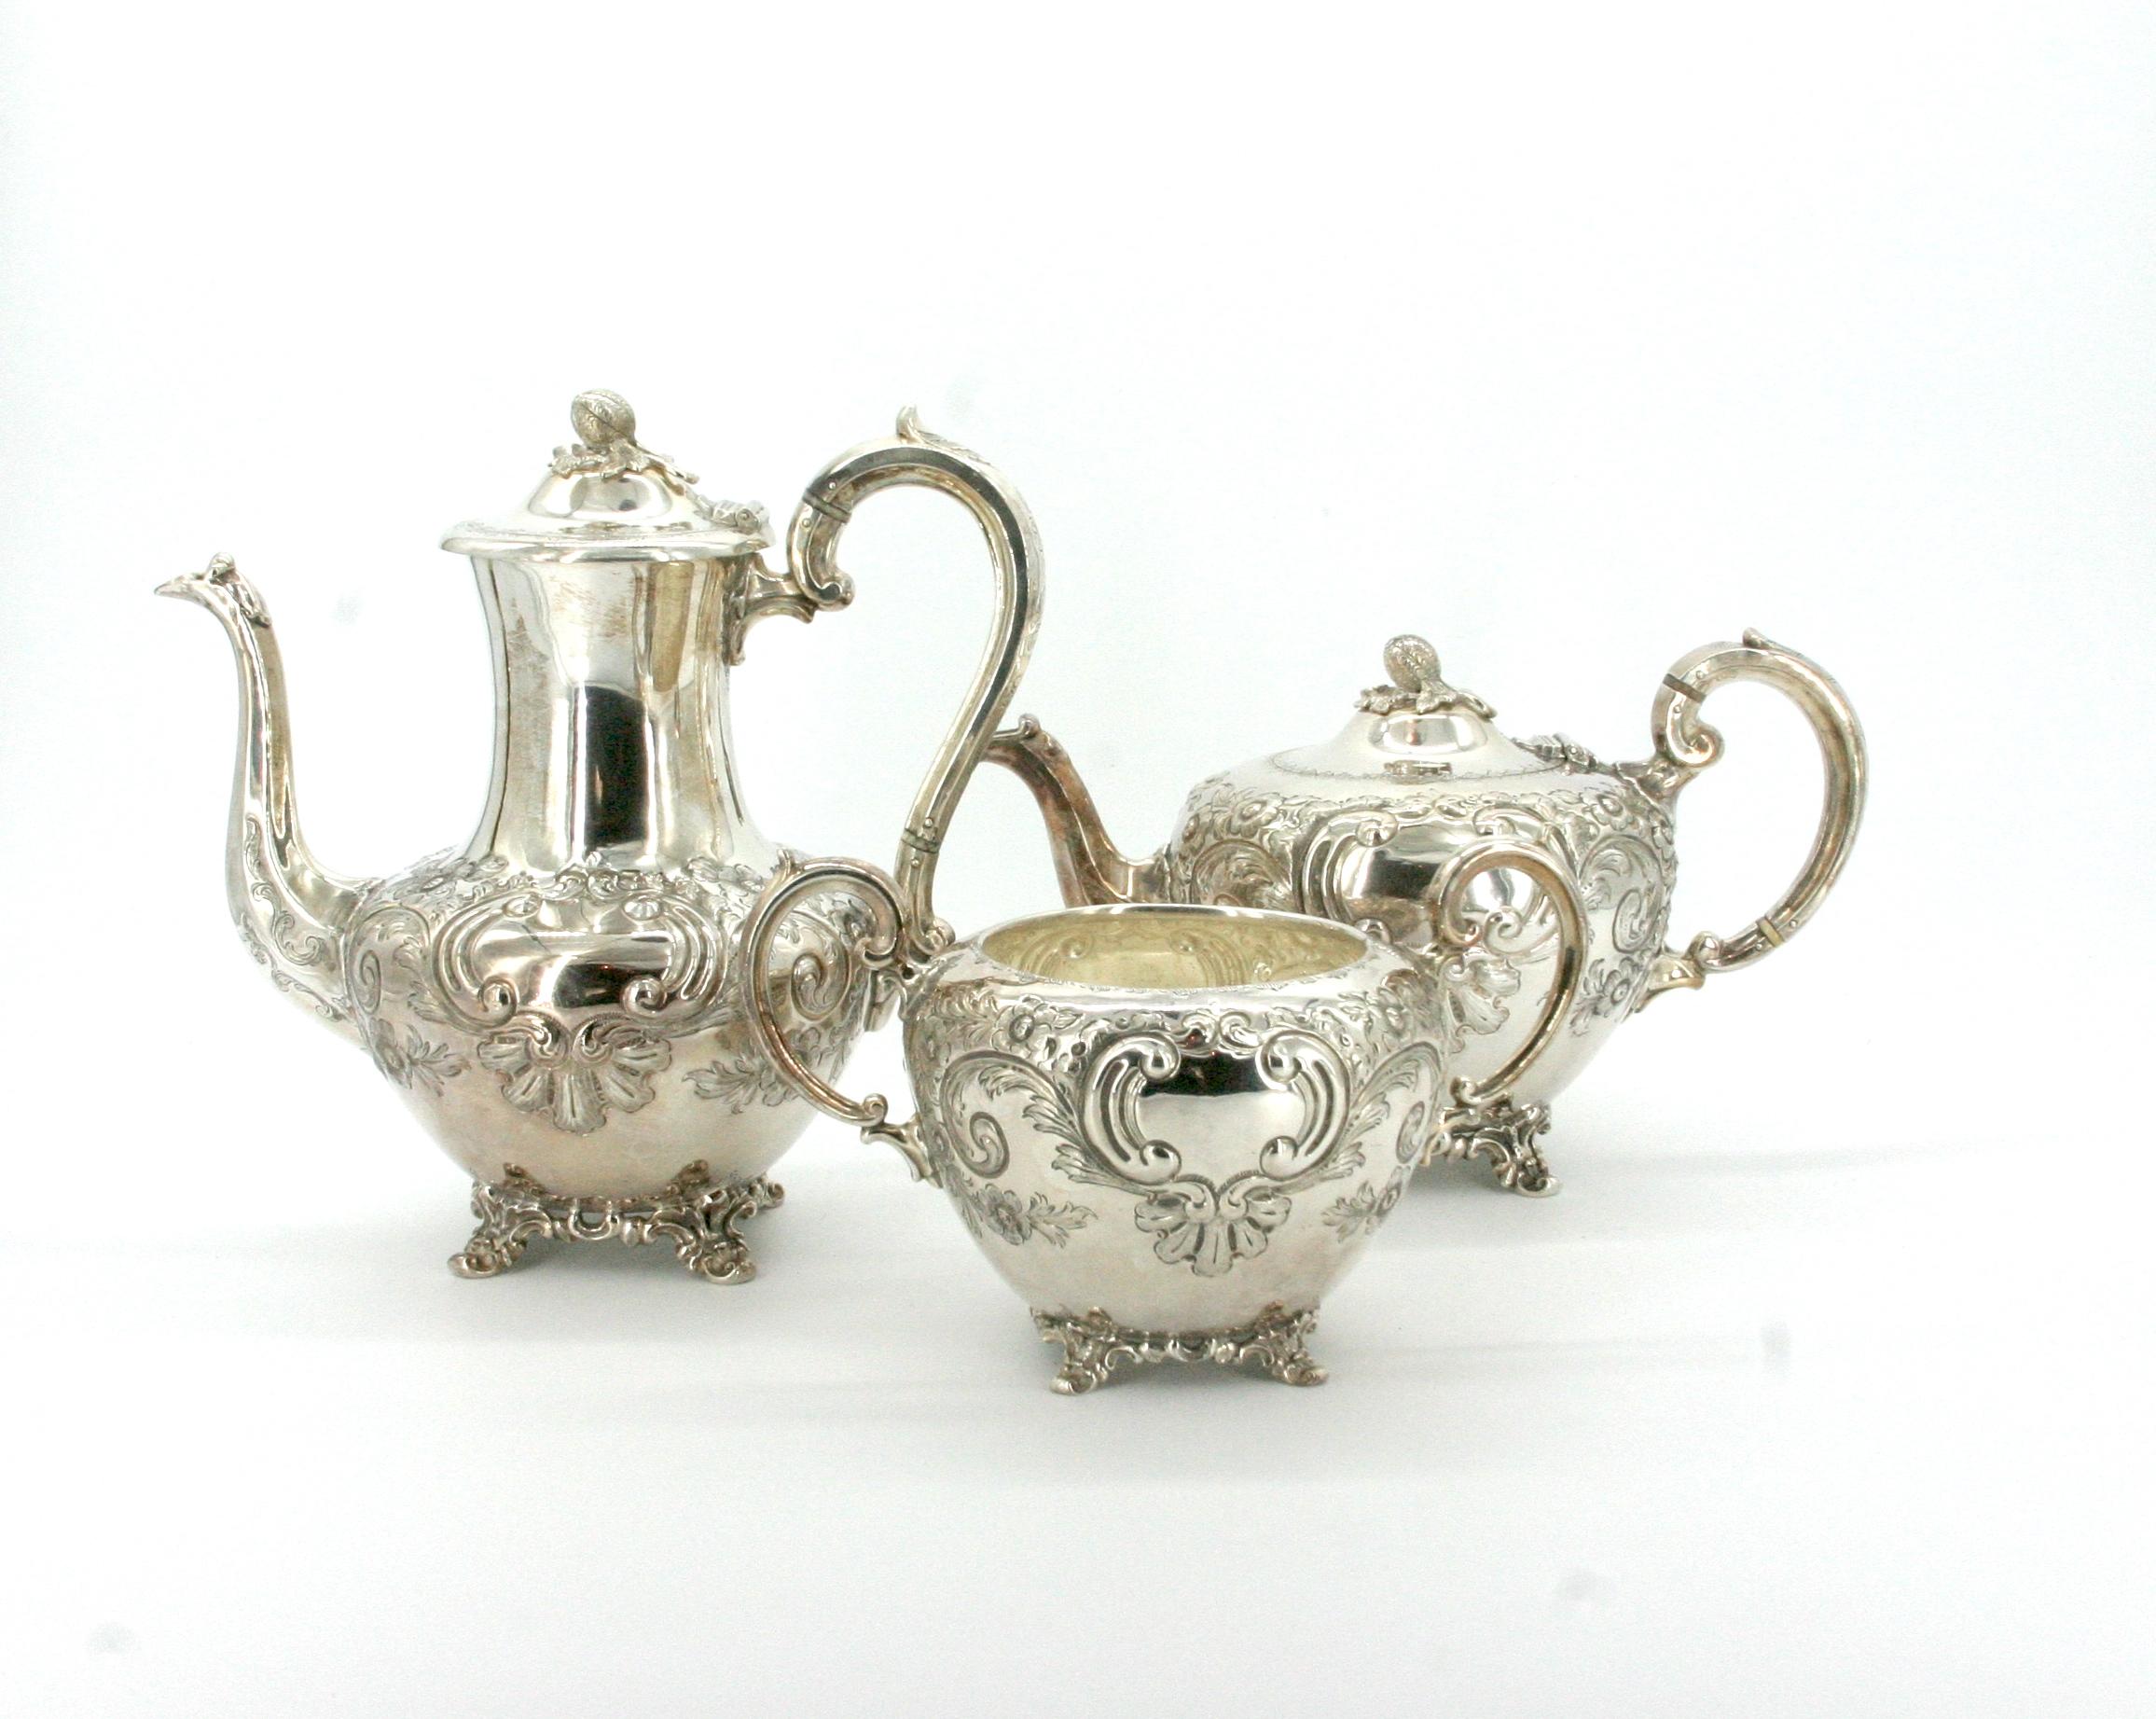 Hand-Crafted 19th Century English Tableware Tea/Coffee Service For Sale